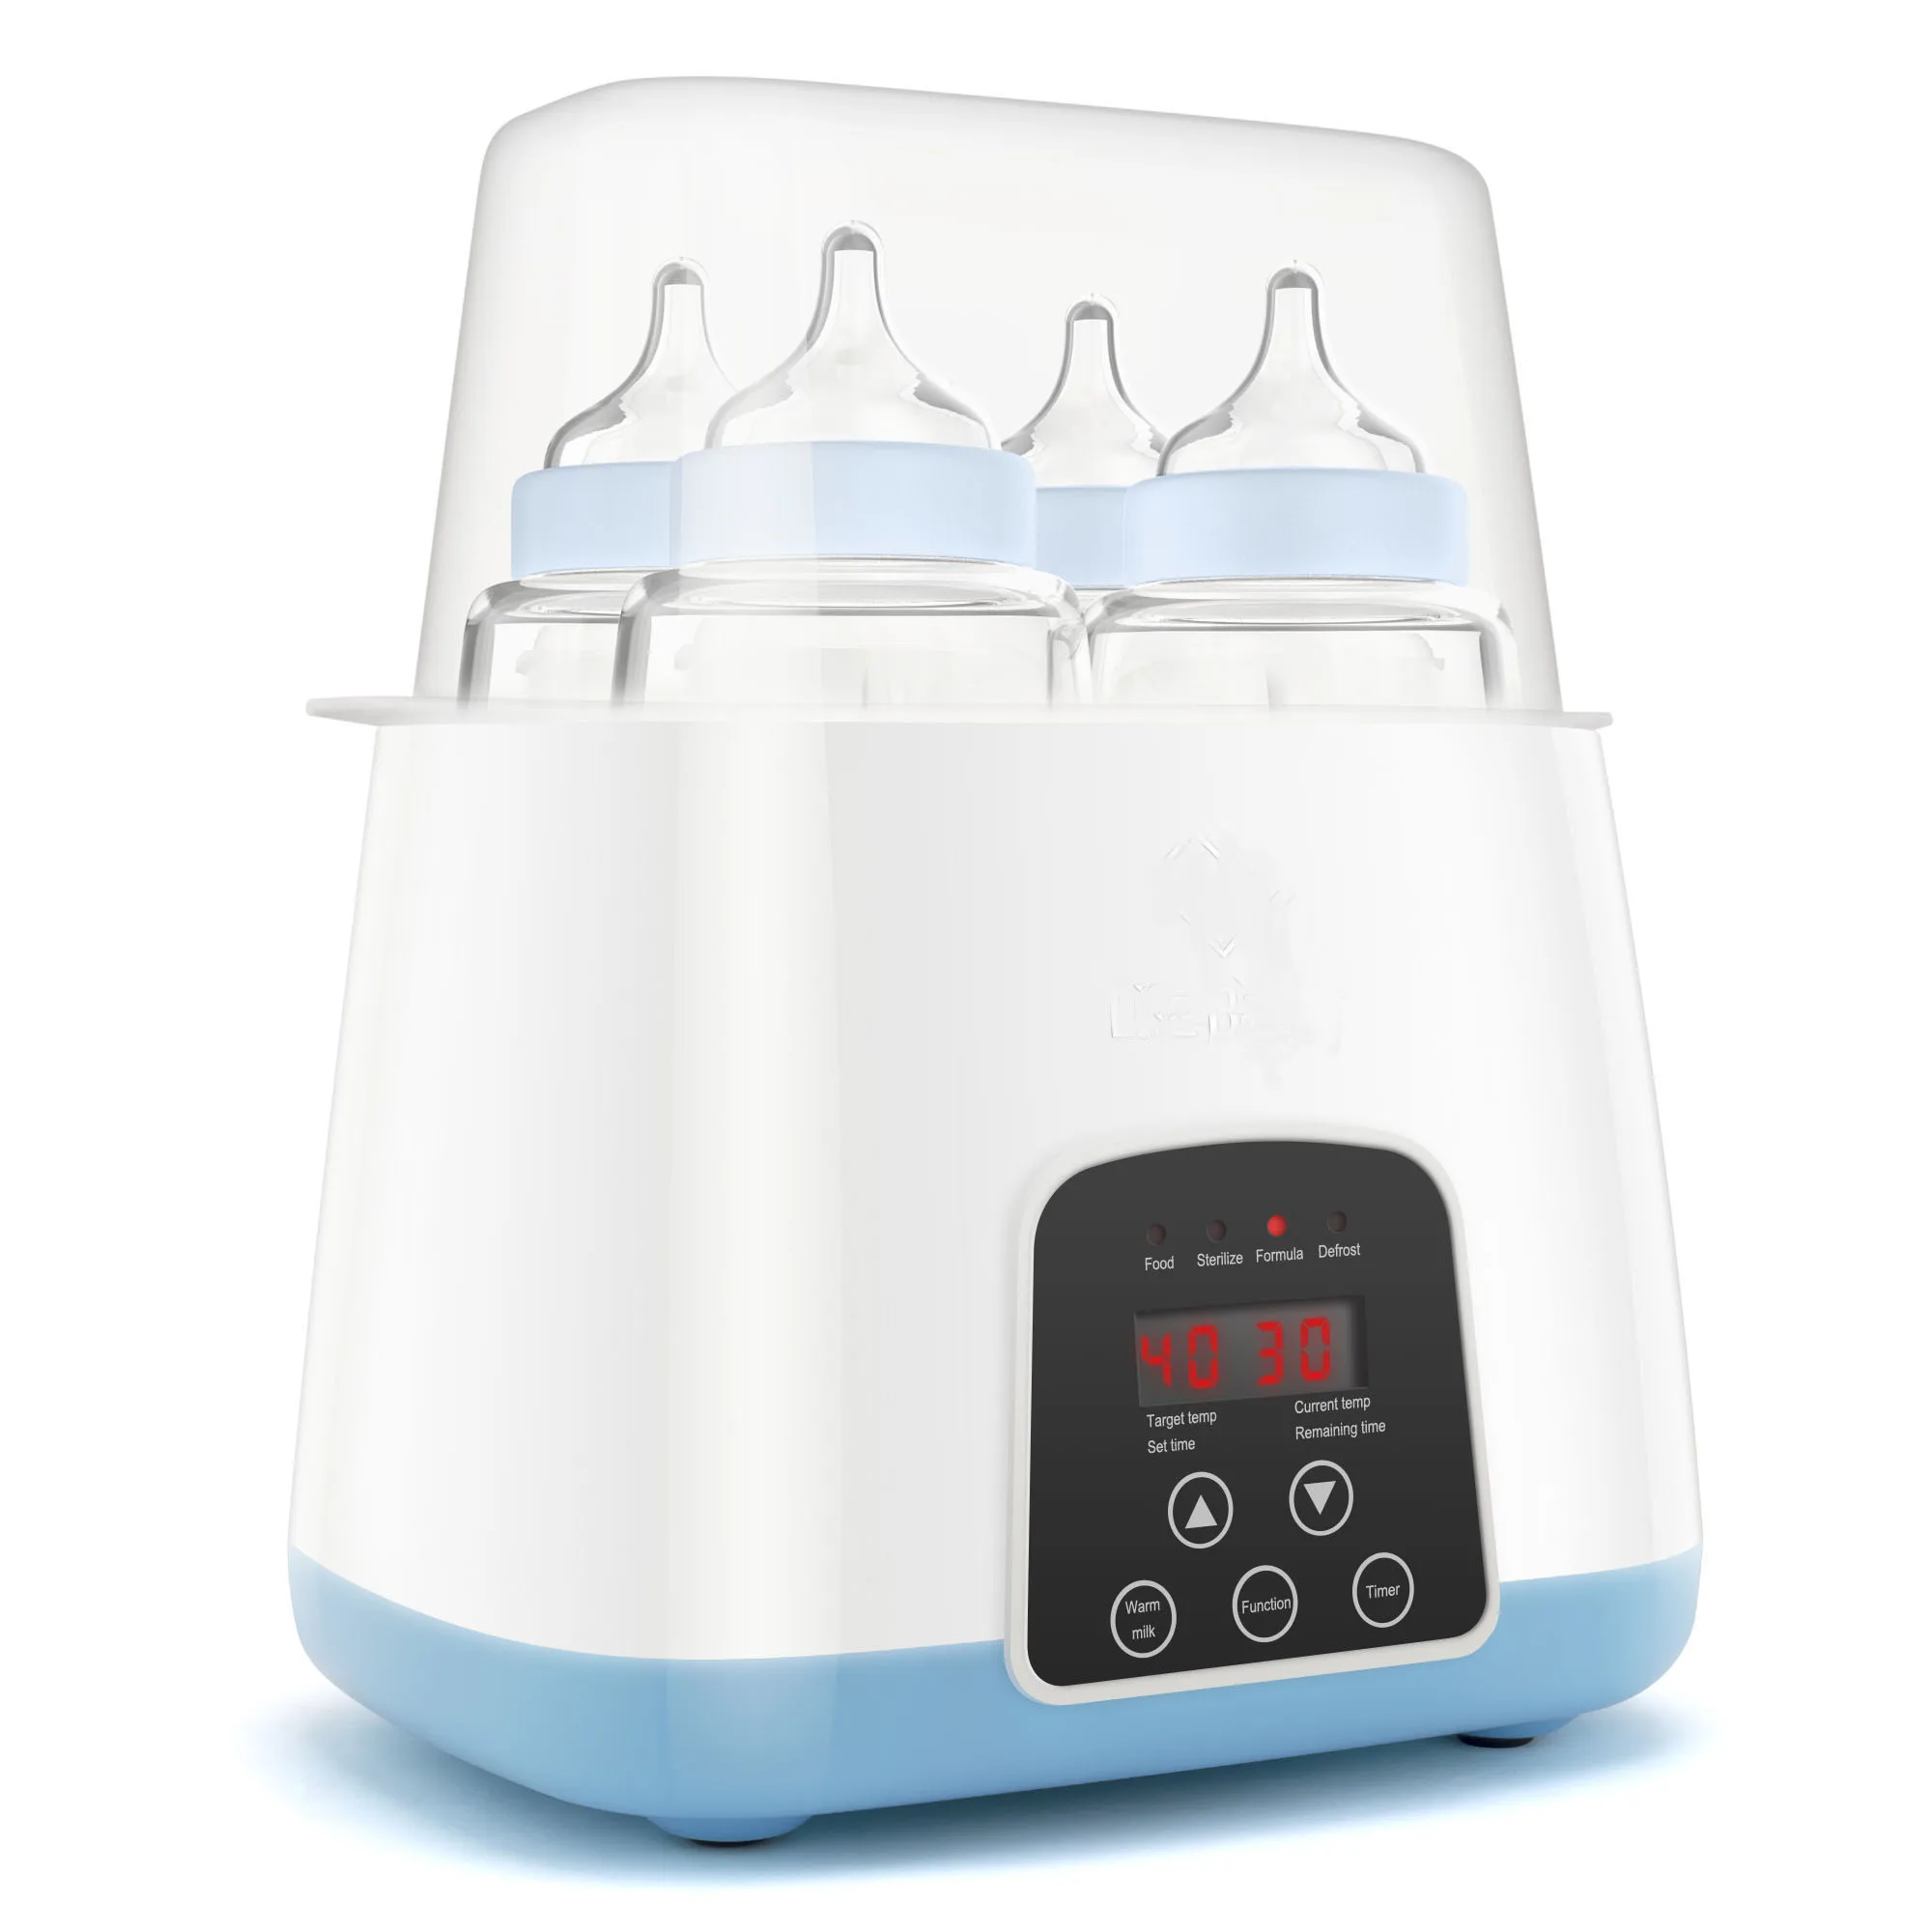 

Double baby bottle sterilizer electric Formula Warmer smart food heater for baby feeder